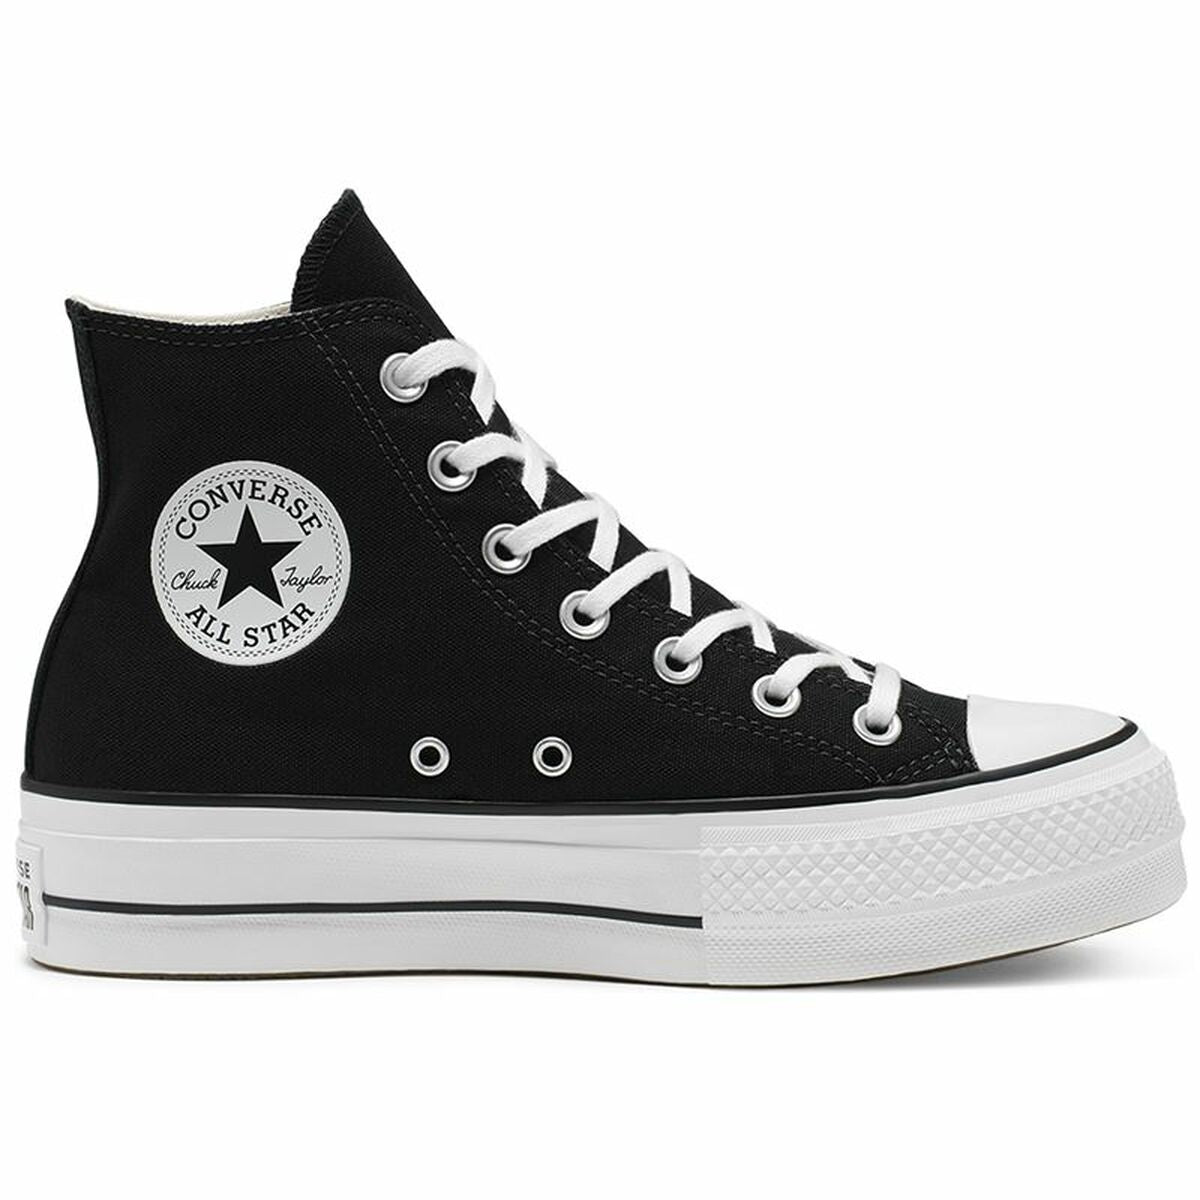 Women’s Casual Trainers Converse Chuck Taylor All Star Platform Black